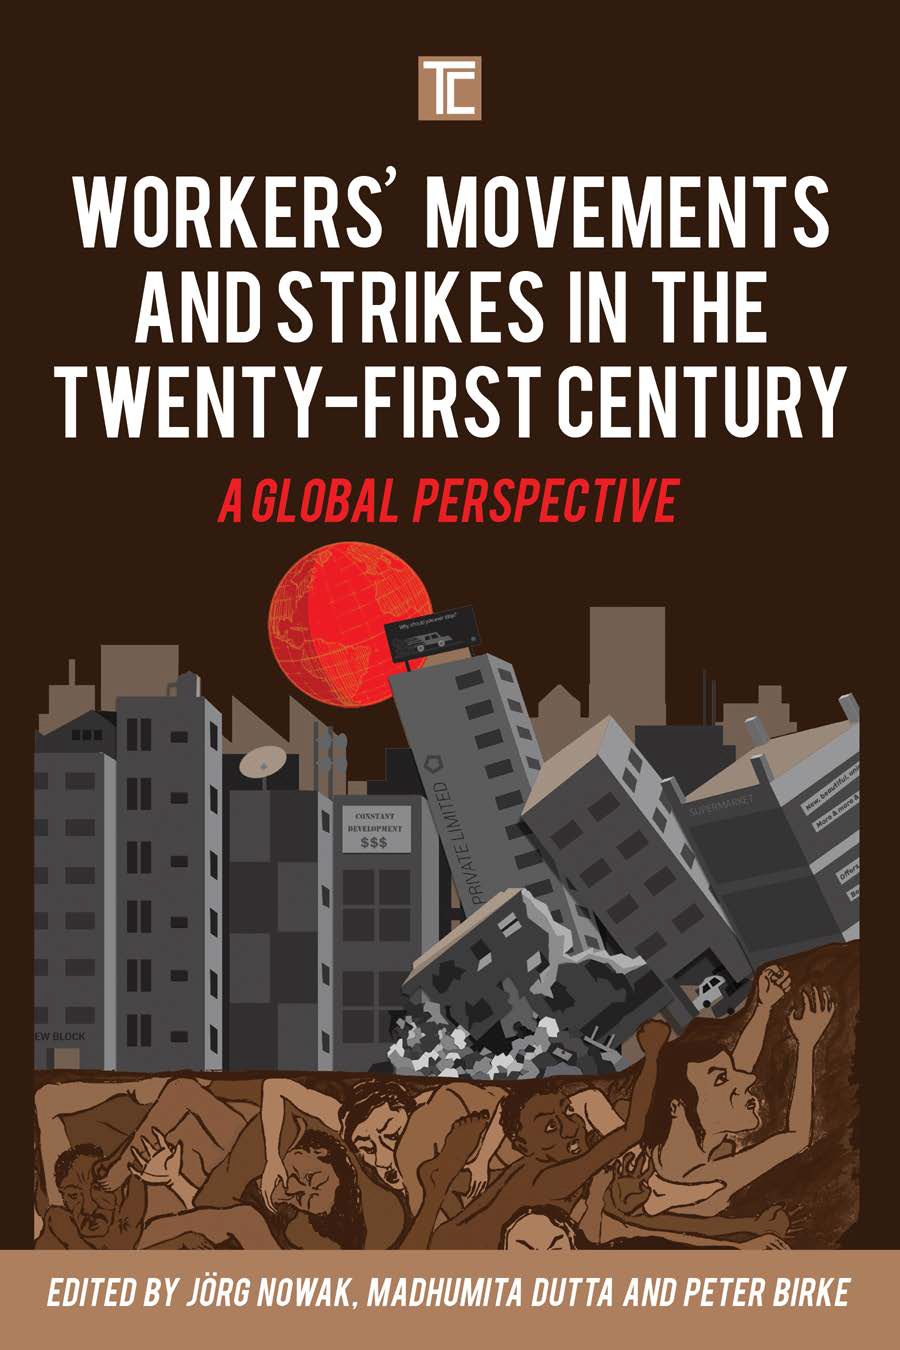 Workers’ Movements and Strikes in the Twenty-First Century. A Global Perspective